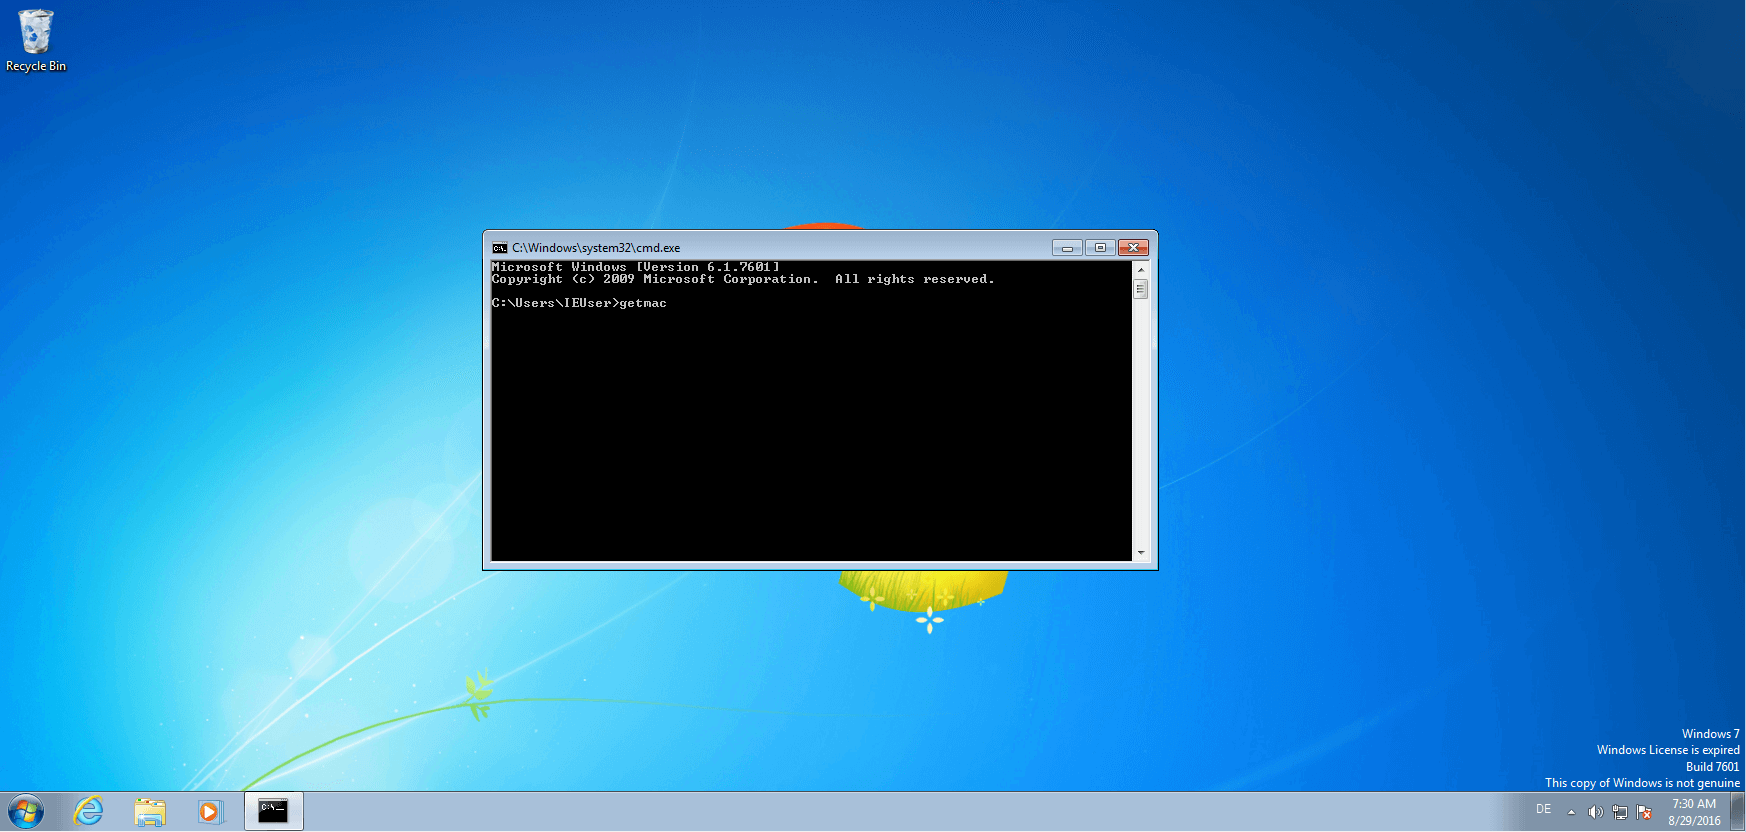 The command “getmac” in the Windows command prompt